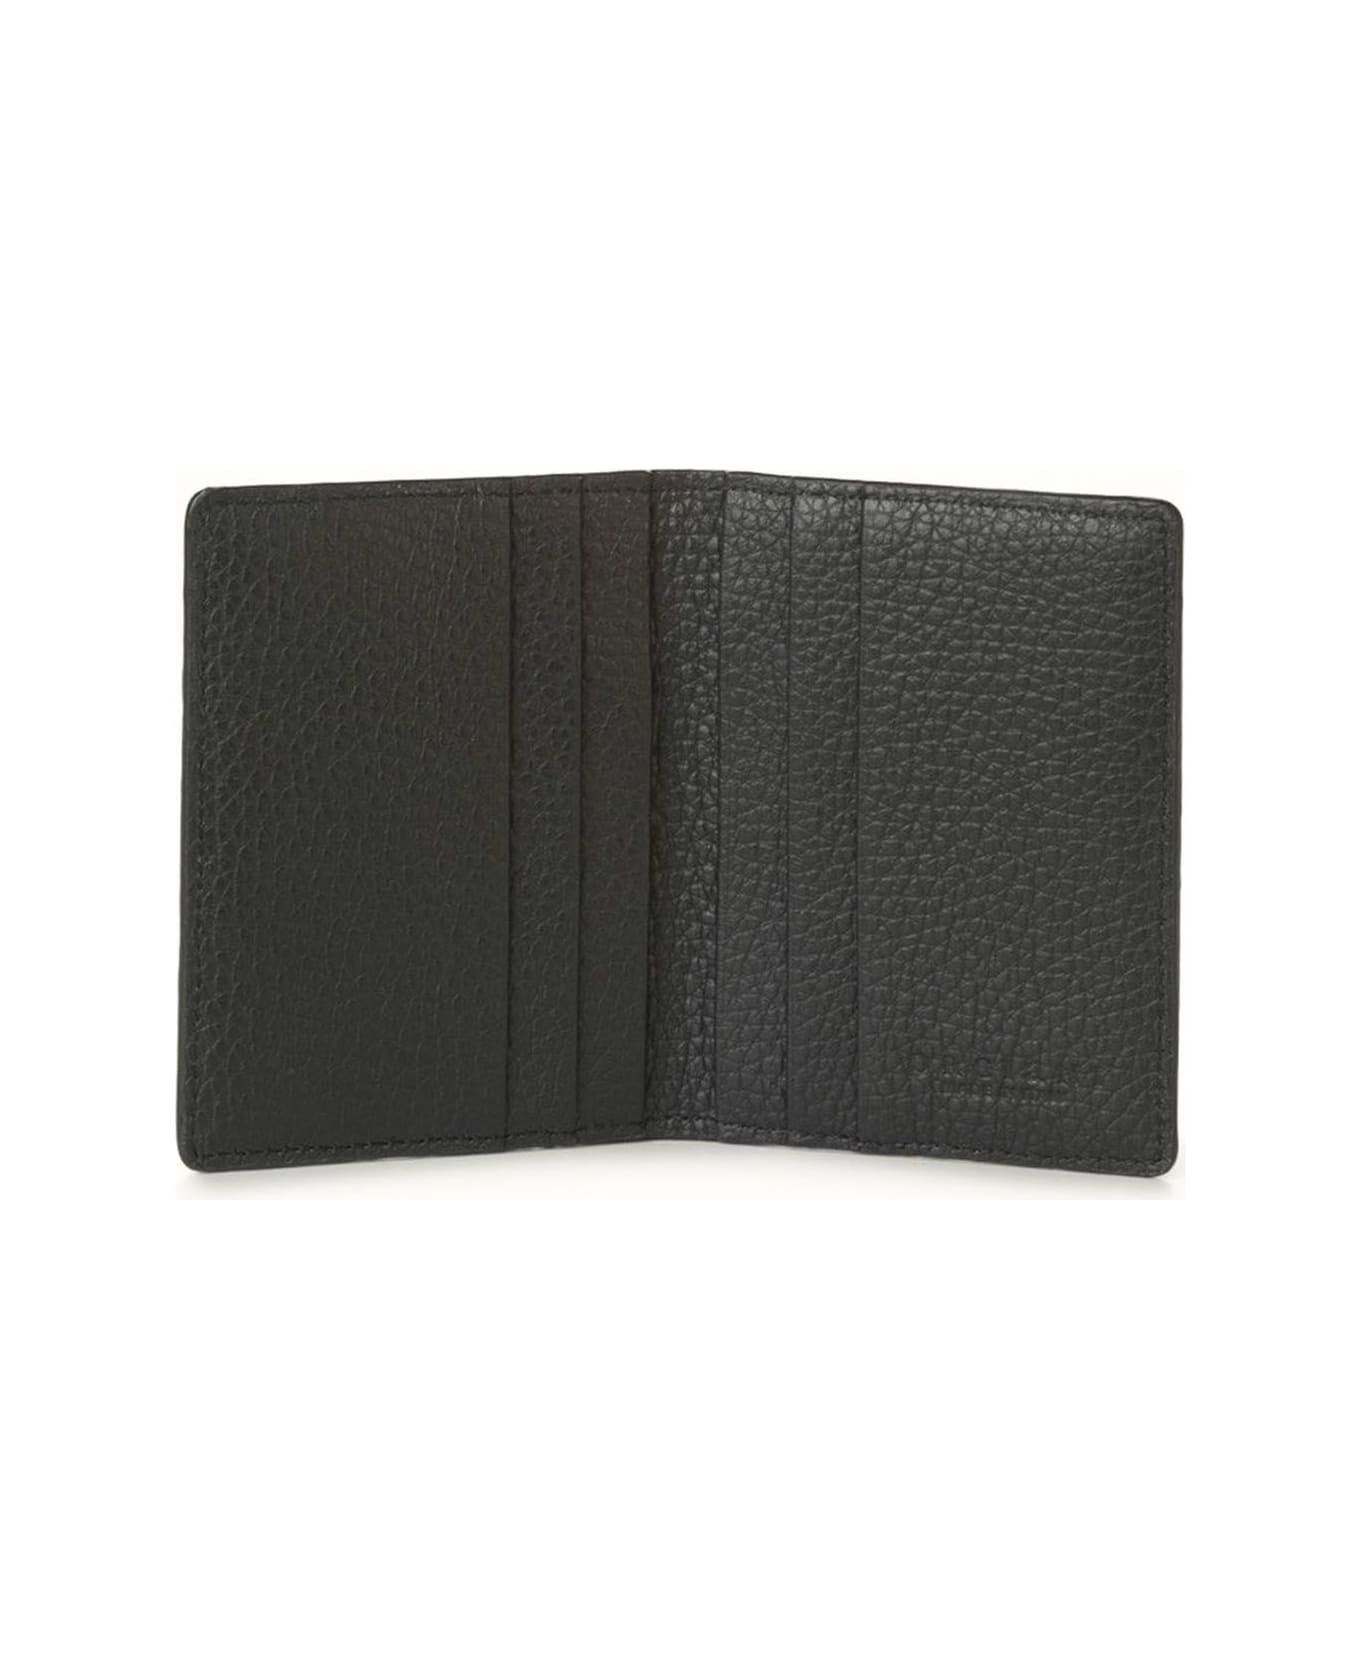 Orciani Micron Hinge Opening Leather Card Holder - Black バッグ